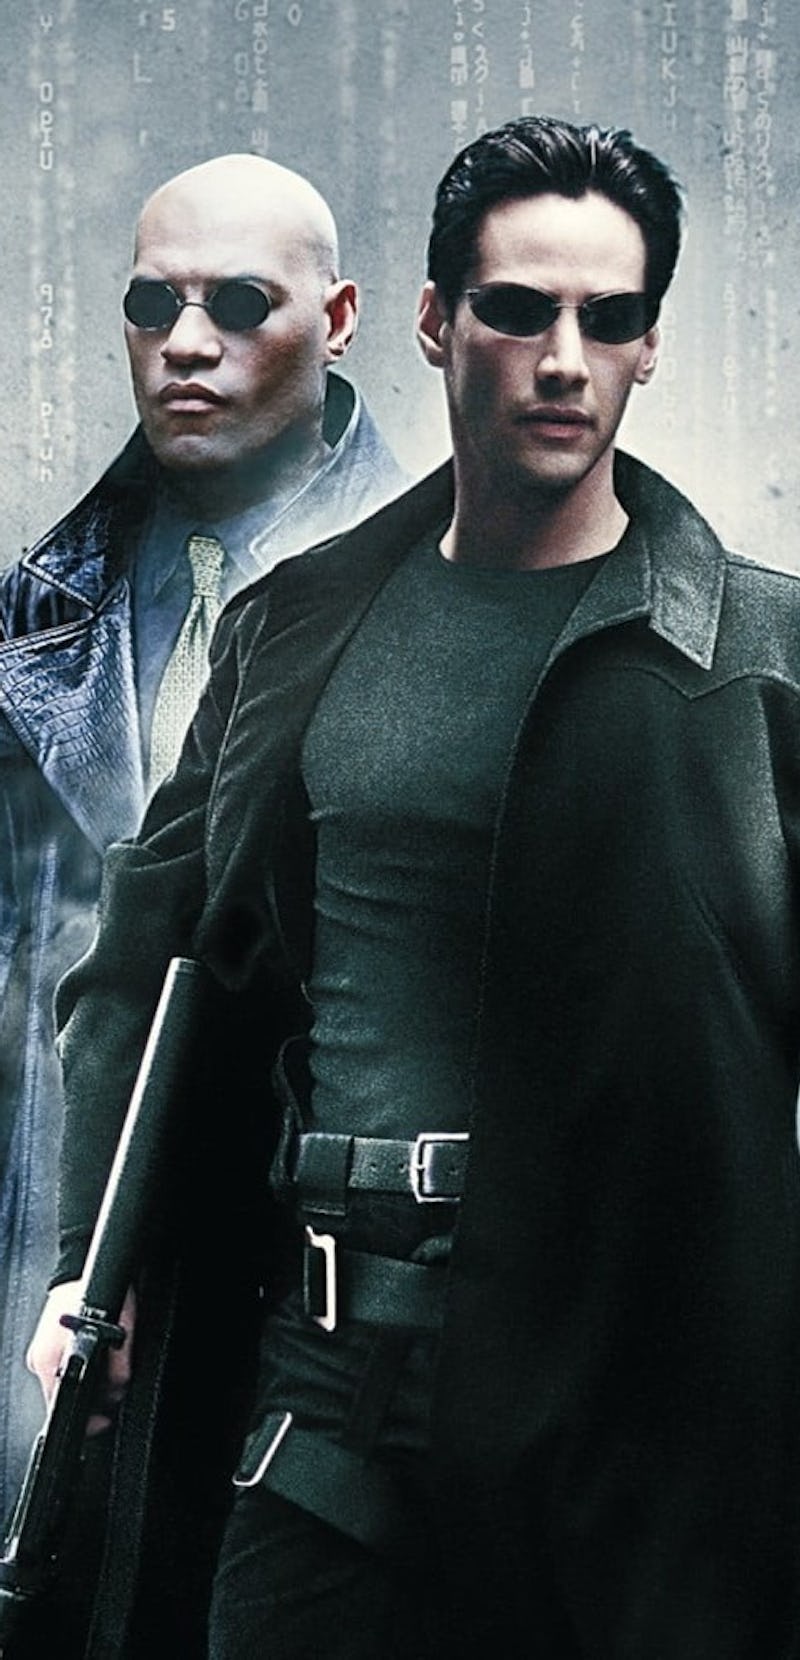 Cover art from The matrix with Morpheus and Neo